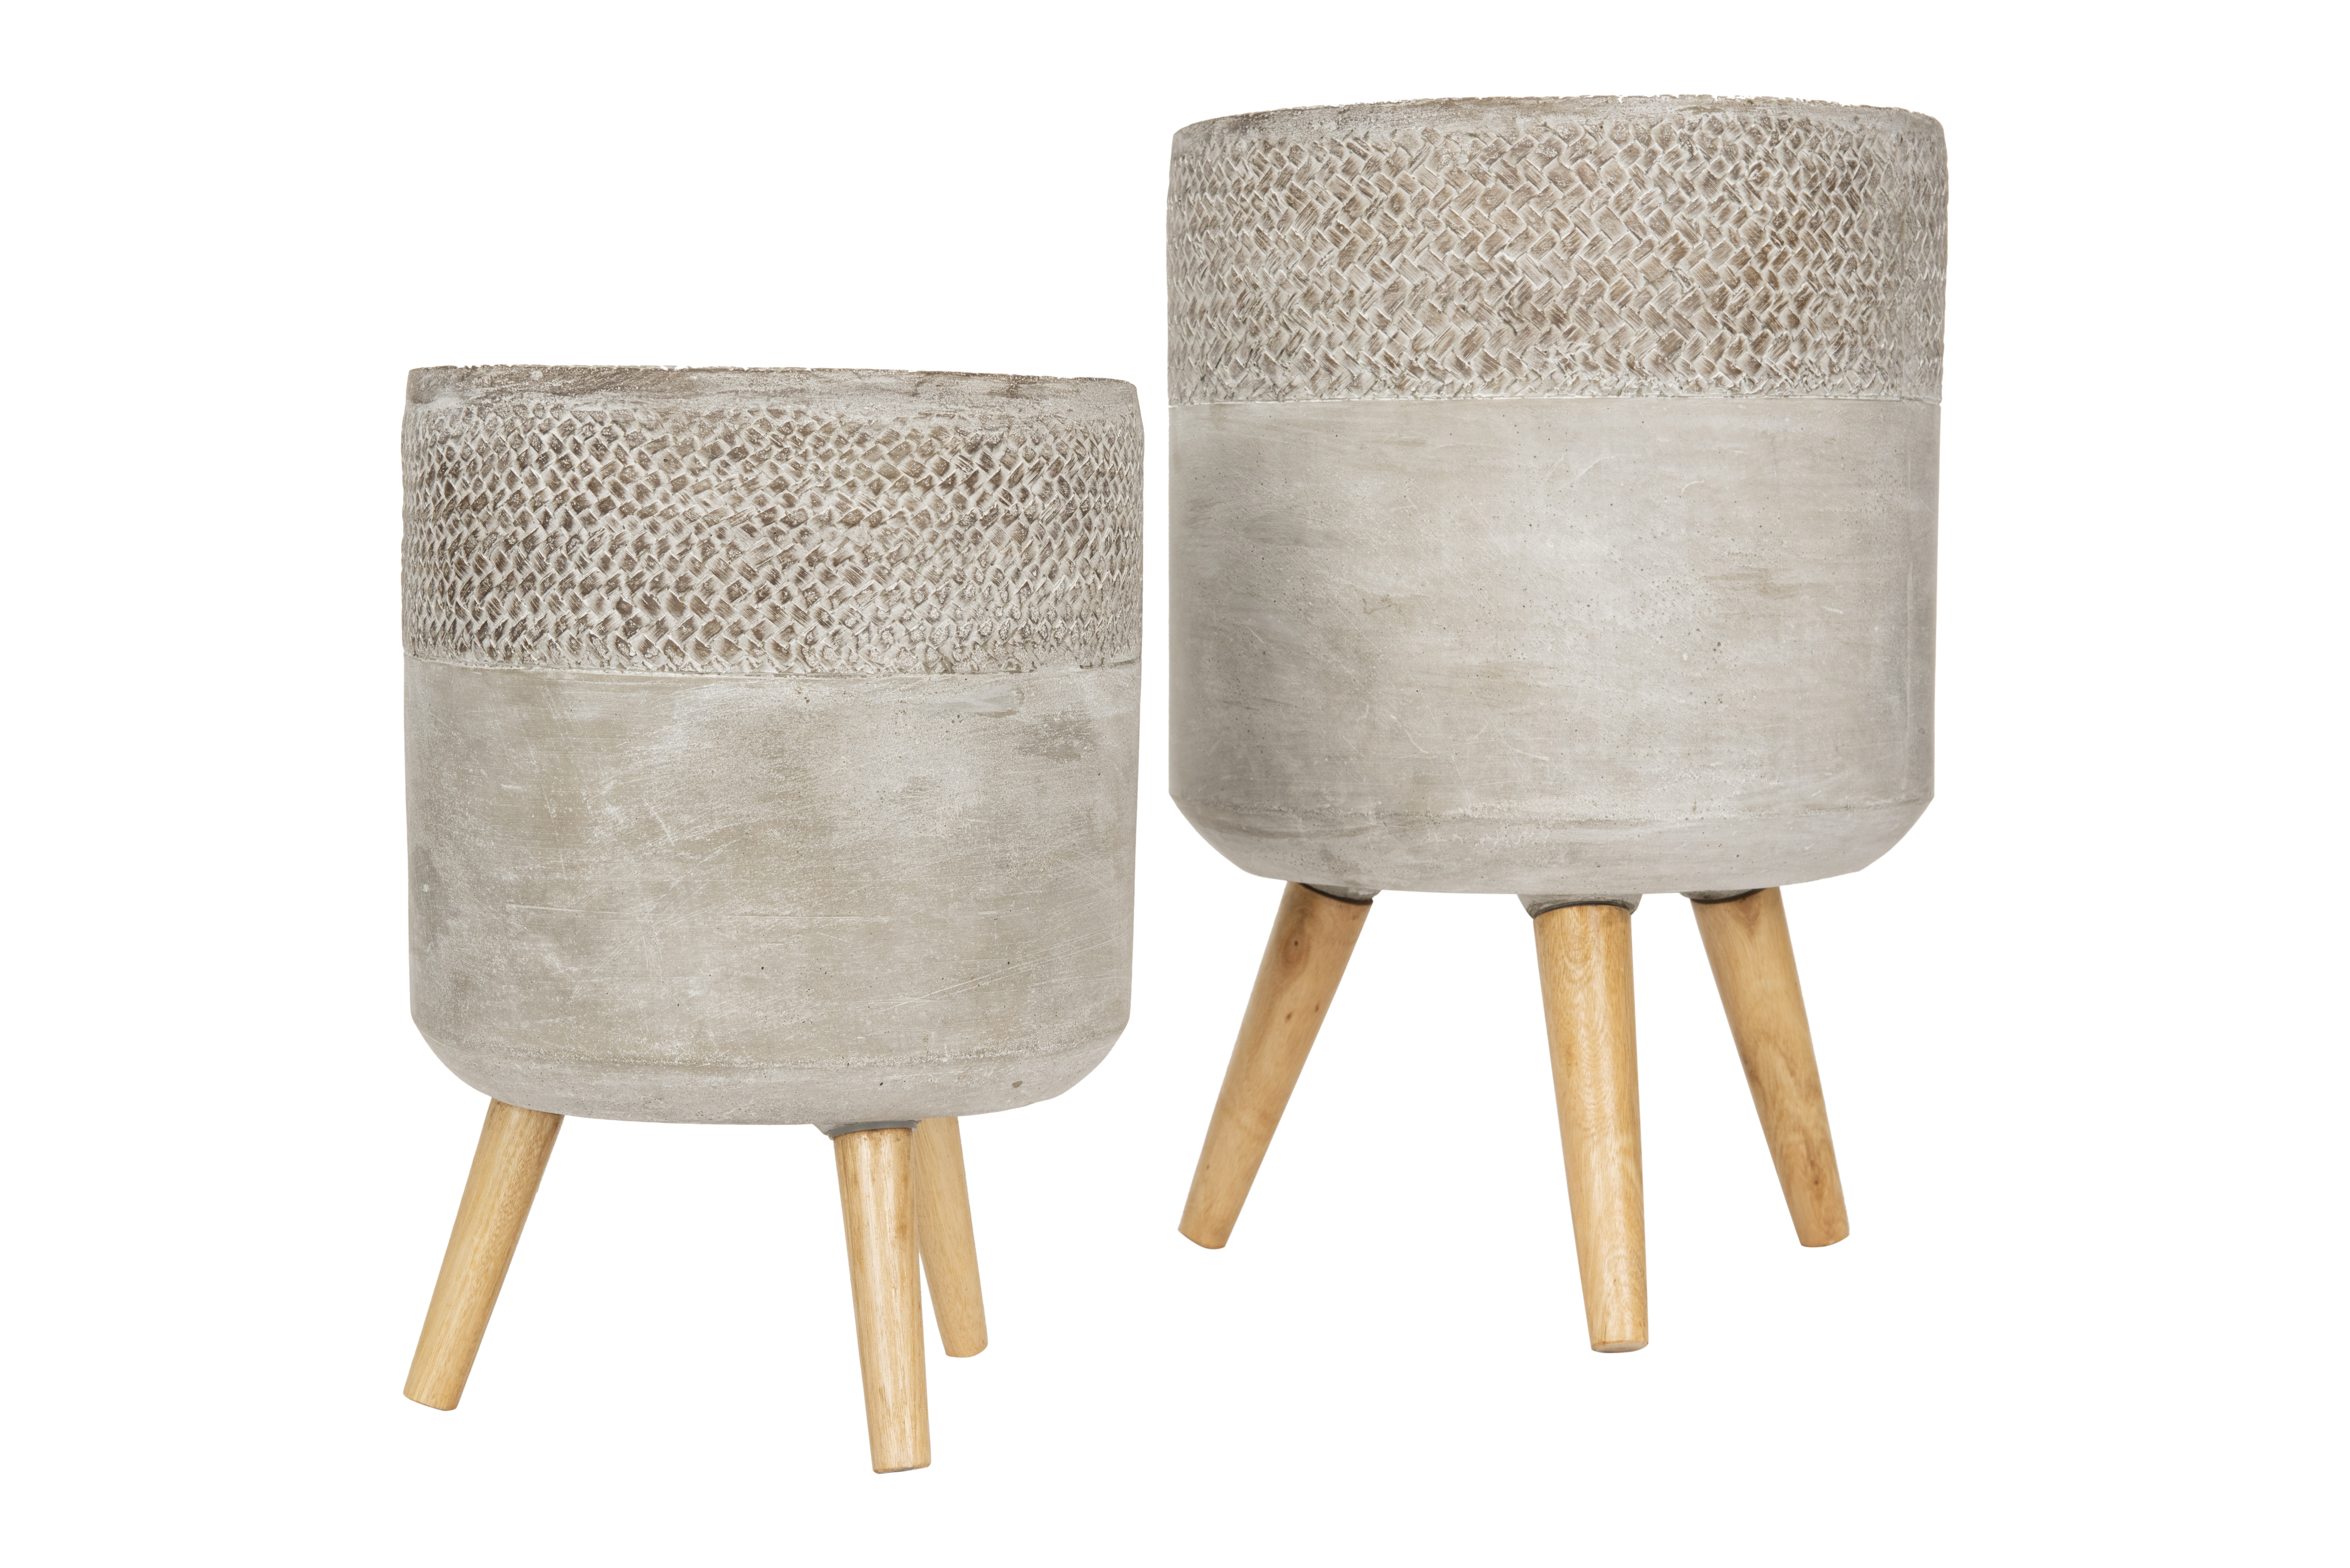 Grey Cement Planter with Removable Wood Legs (Set of 2 Sizes) - Image 1